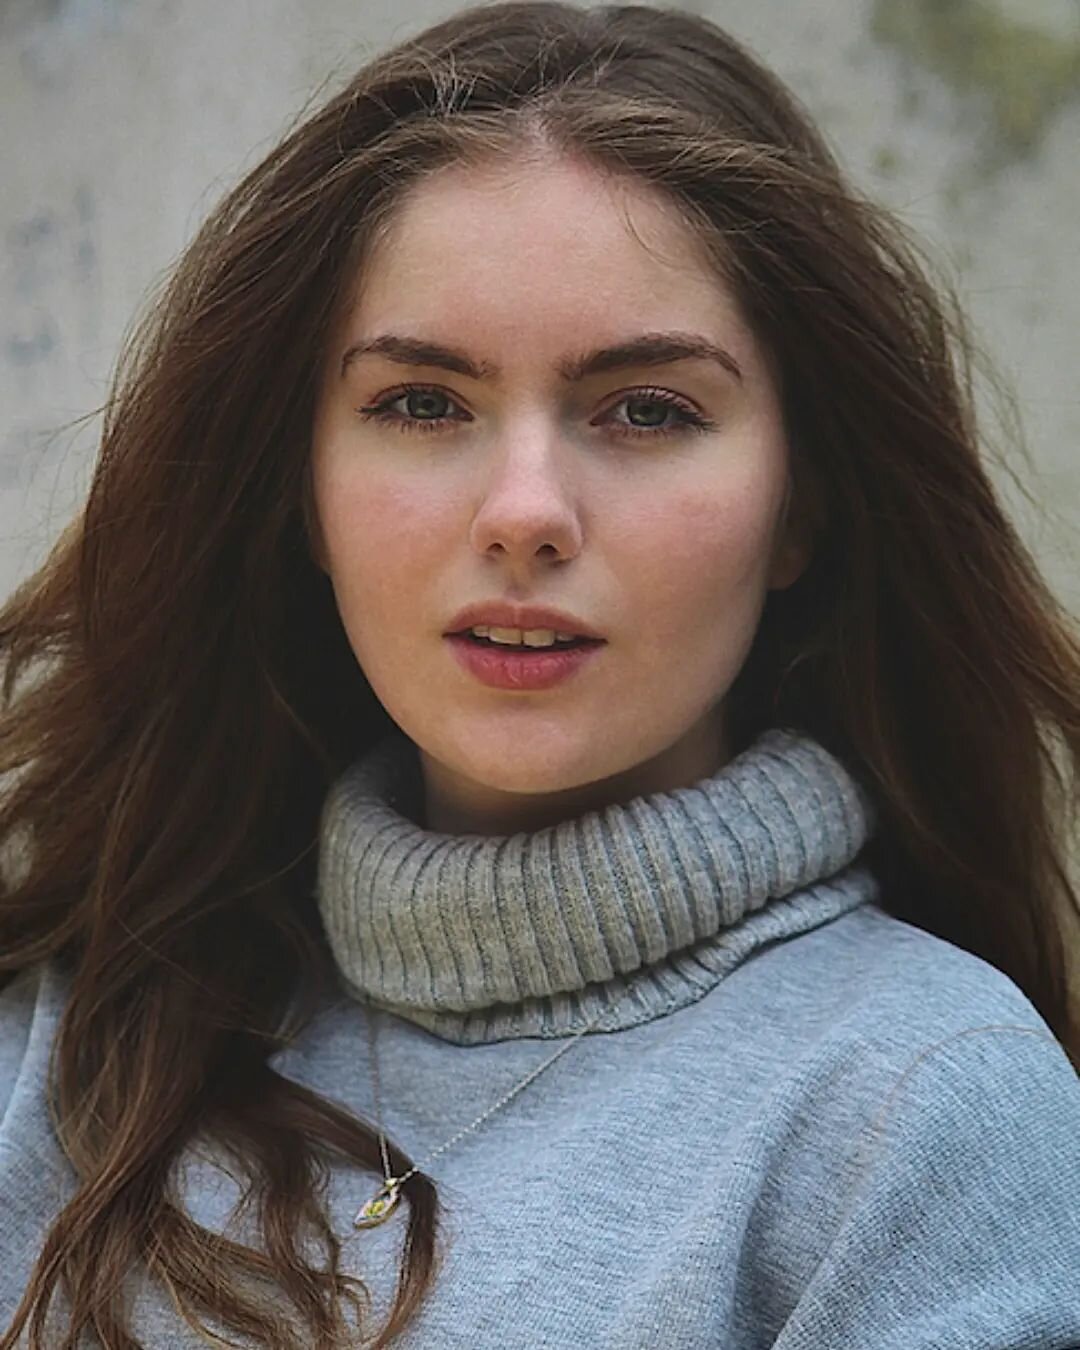 Name: Chloe Galbe
Playing age: 19-28

Chloe is a London-based actor, who has graduated from the Royal Central School of Speech and Drama in 2022. Chloe&rsquo;s home might be London, where she currently lives, or Helsinki, where she is from, or Paris,